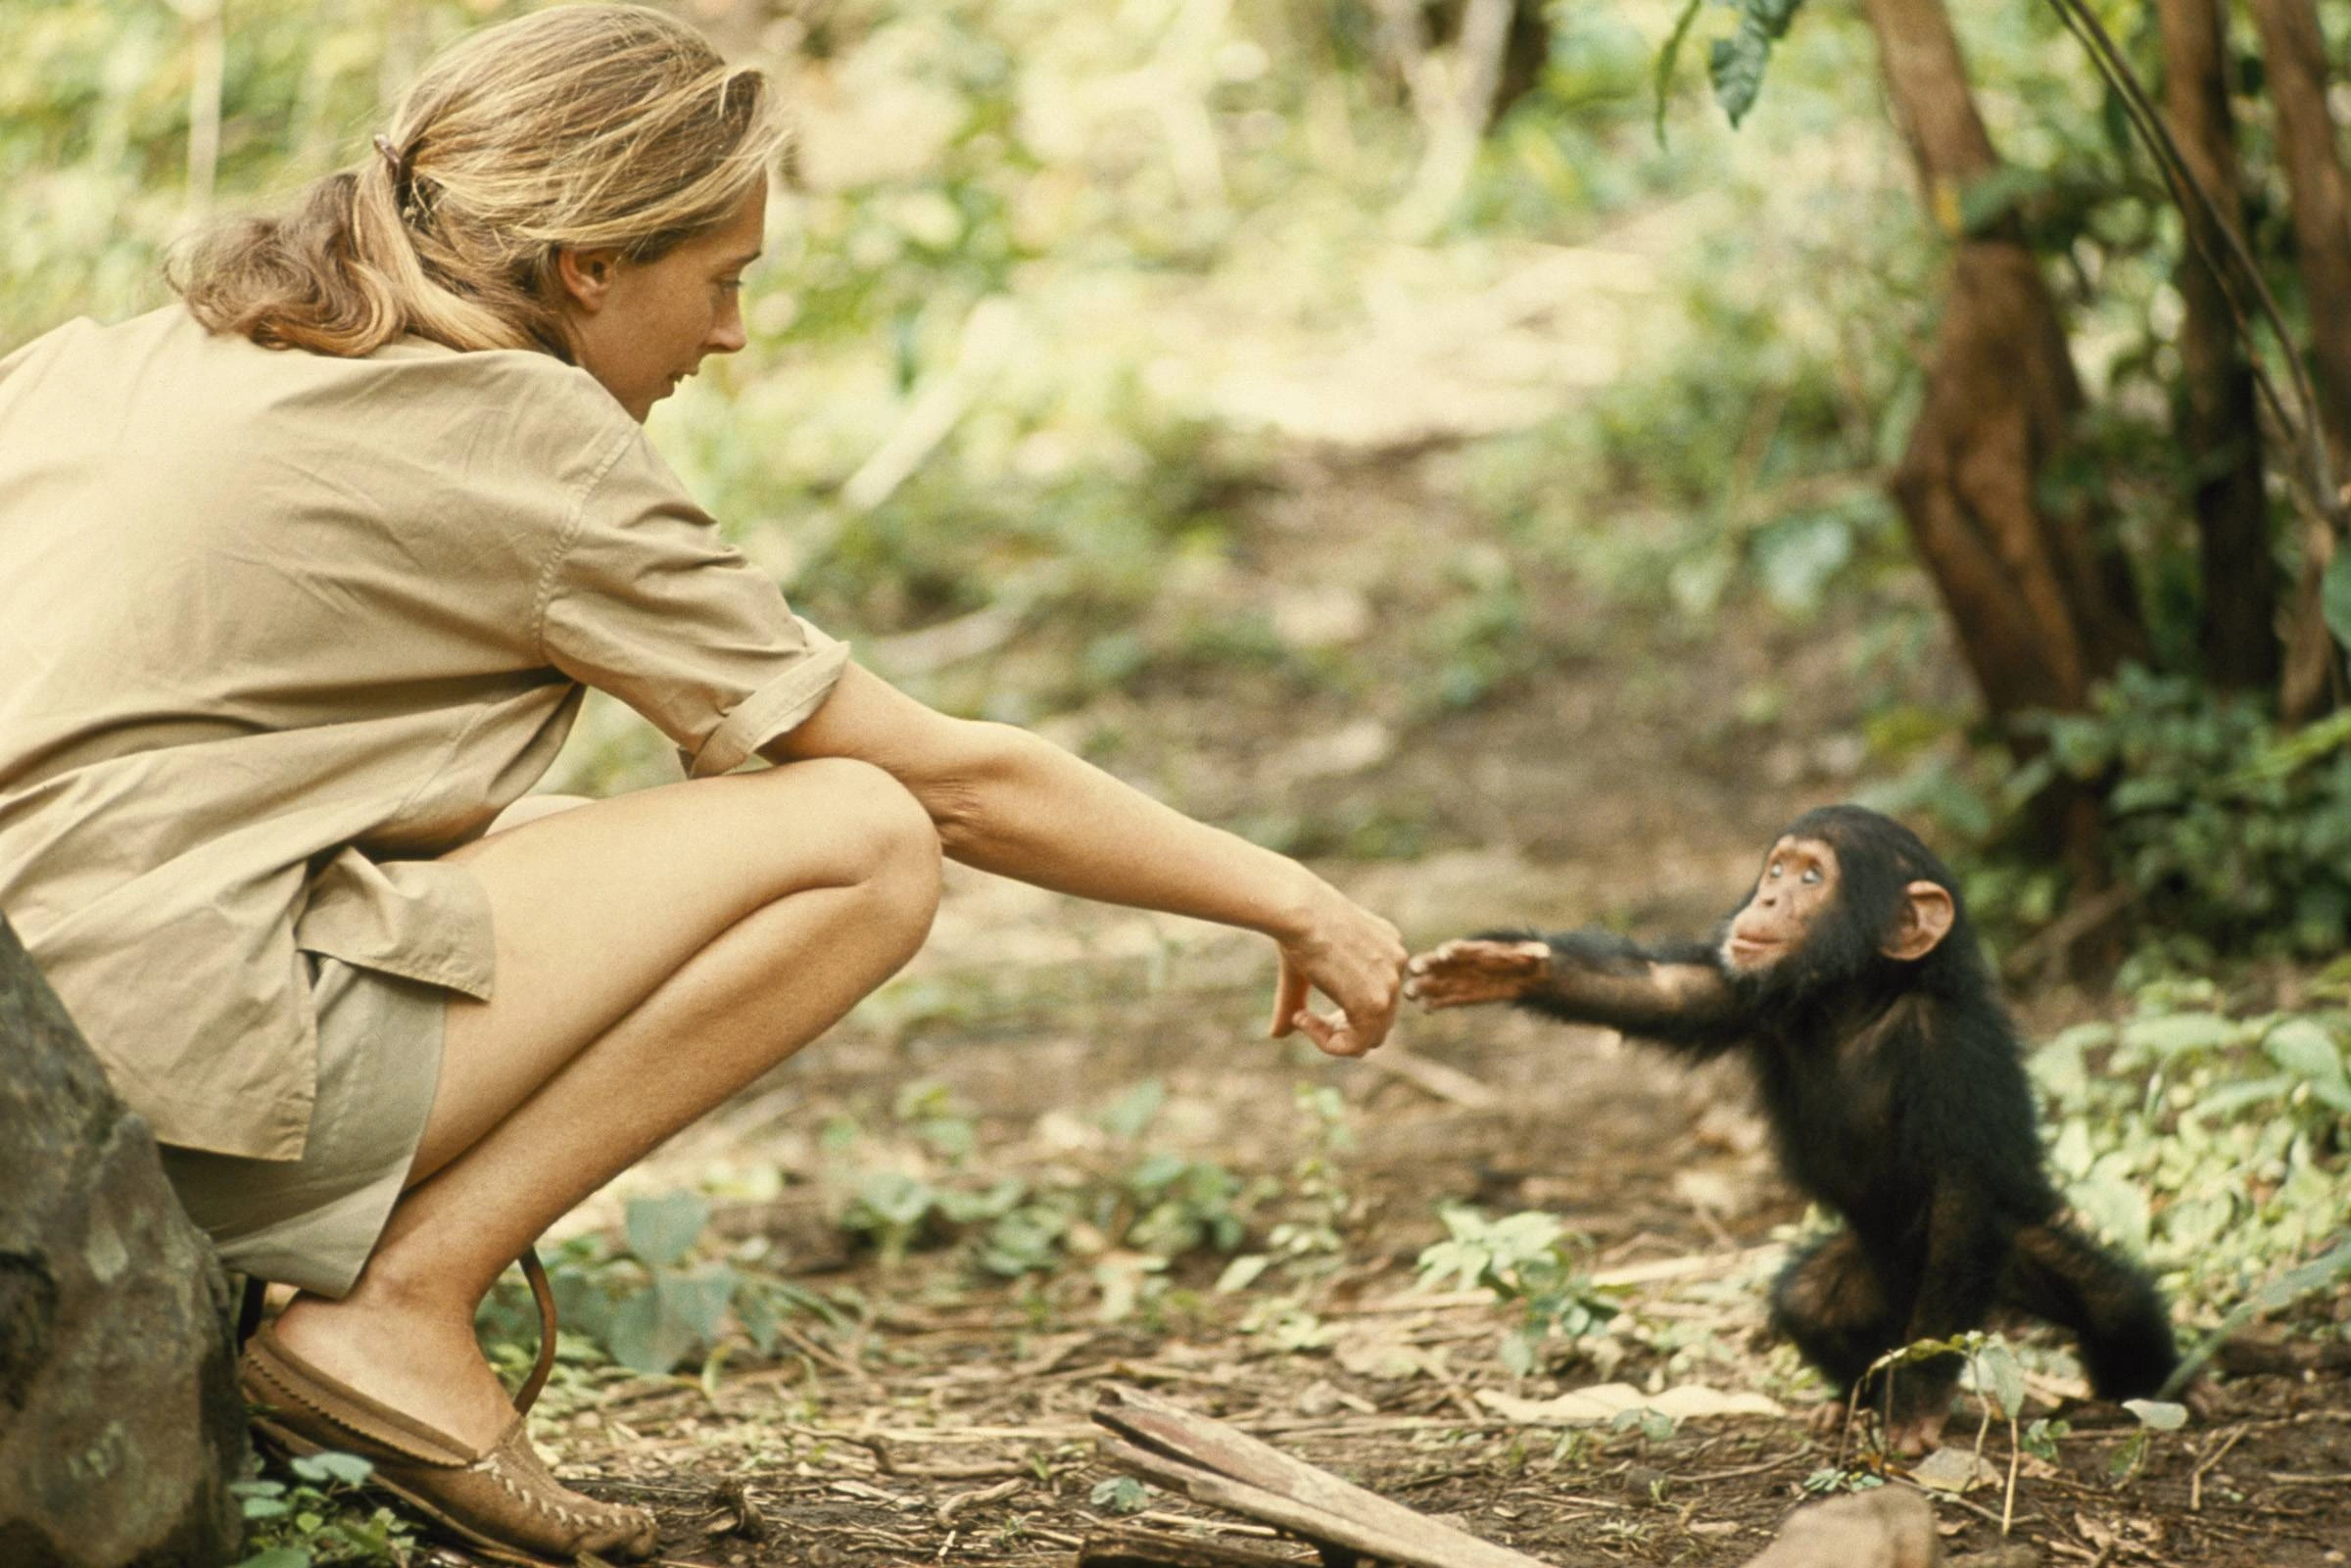 Jane Goodall with chimps